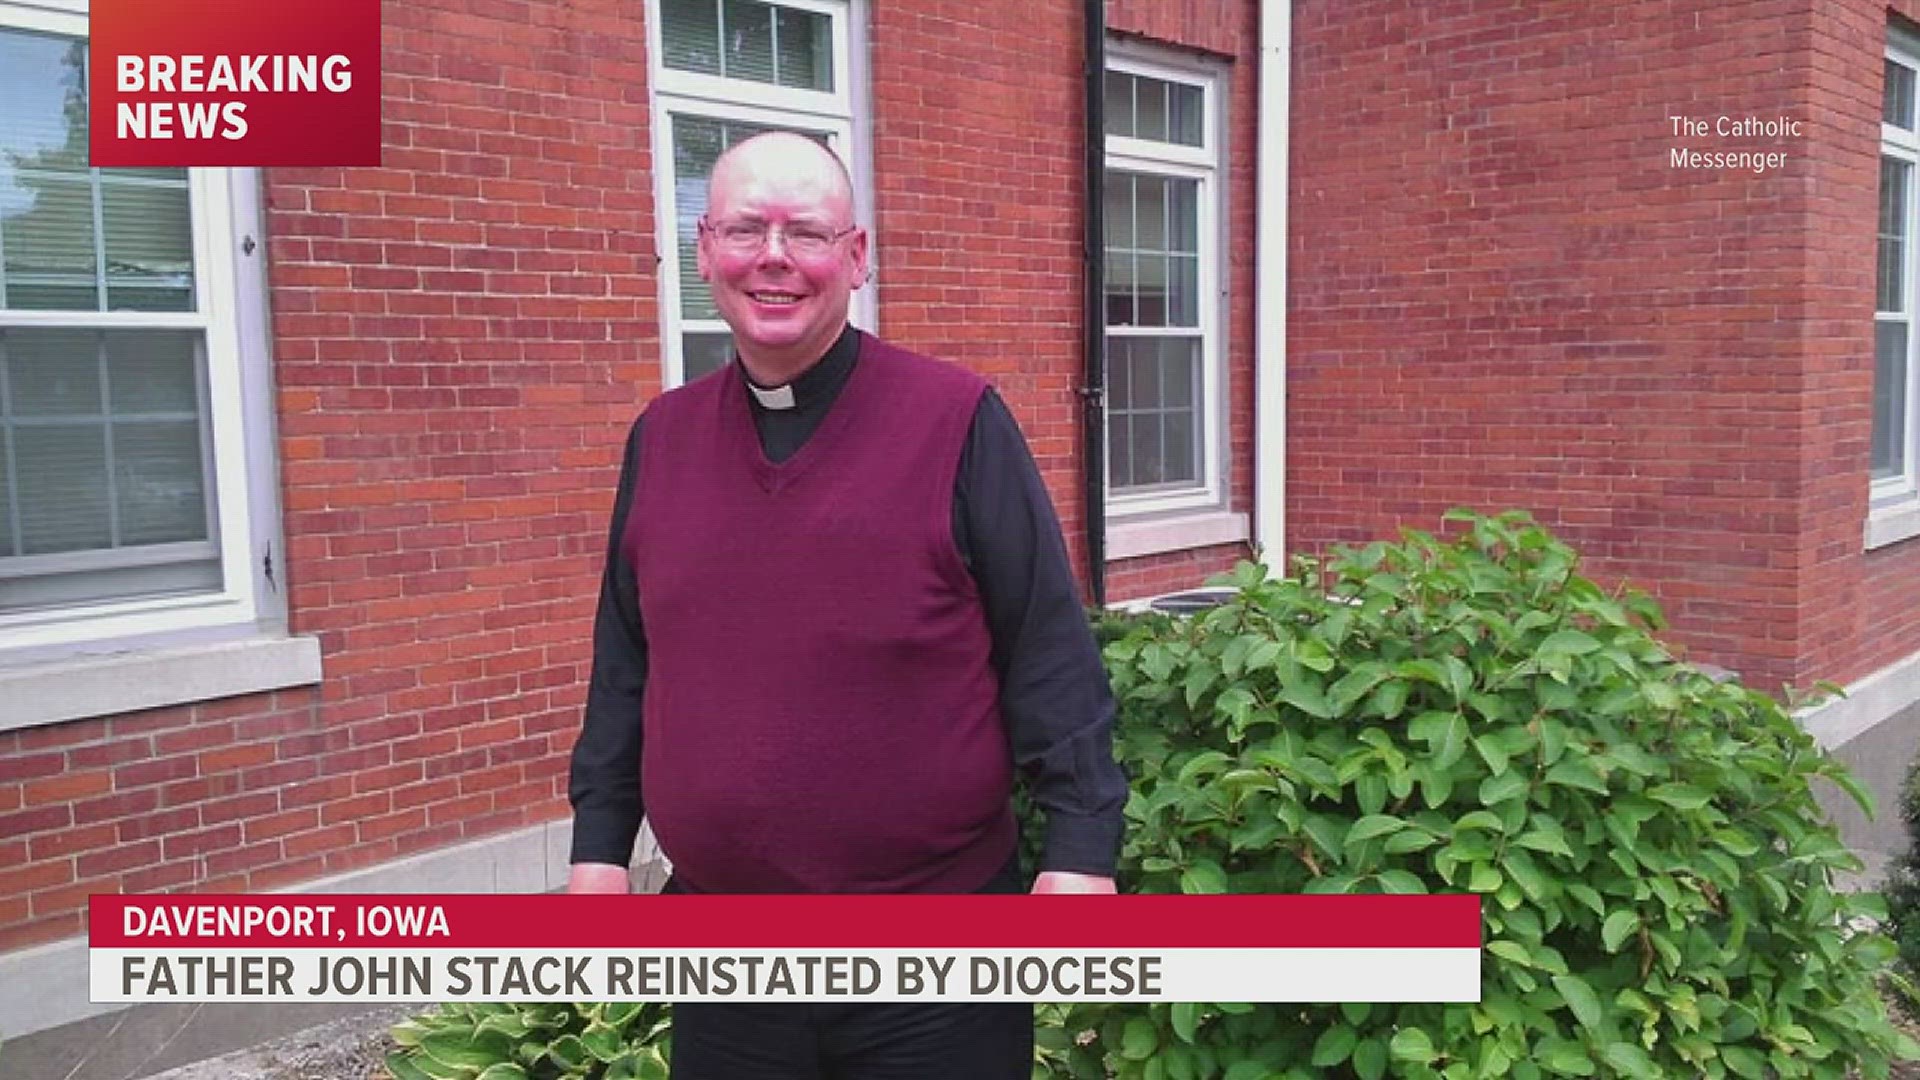 The allegations against Rev. John Stack stem from the mid-1990s. He had previously been accused in 2013 of abuse in the mid-1980s as well.